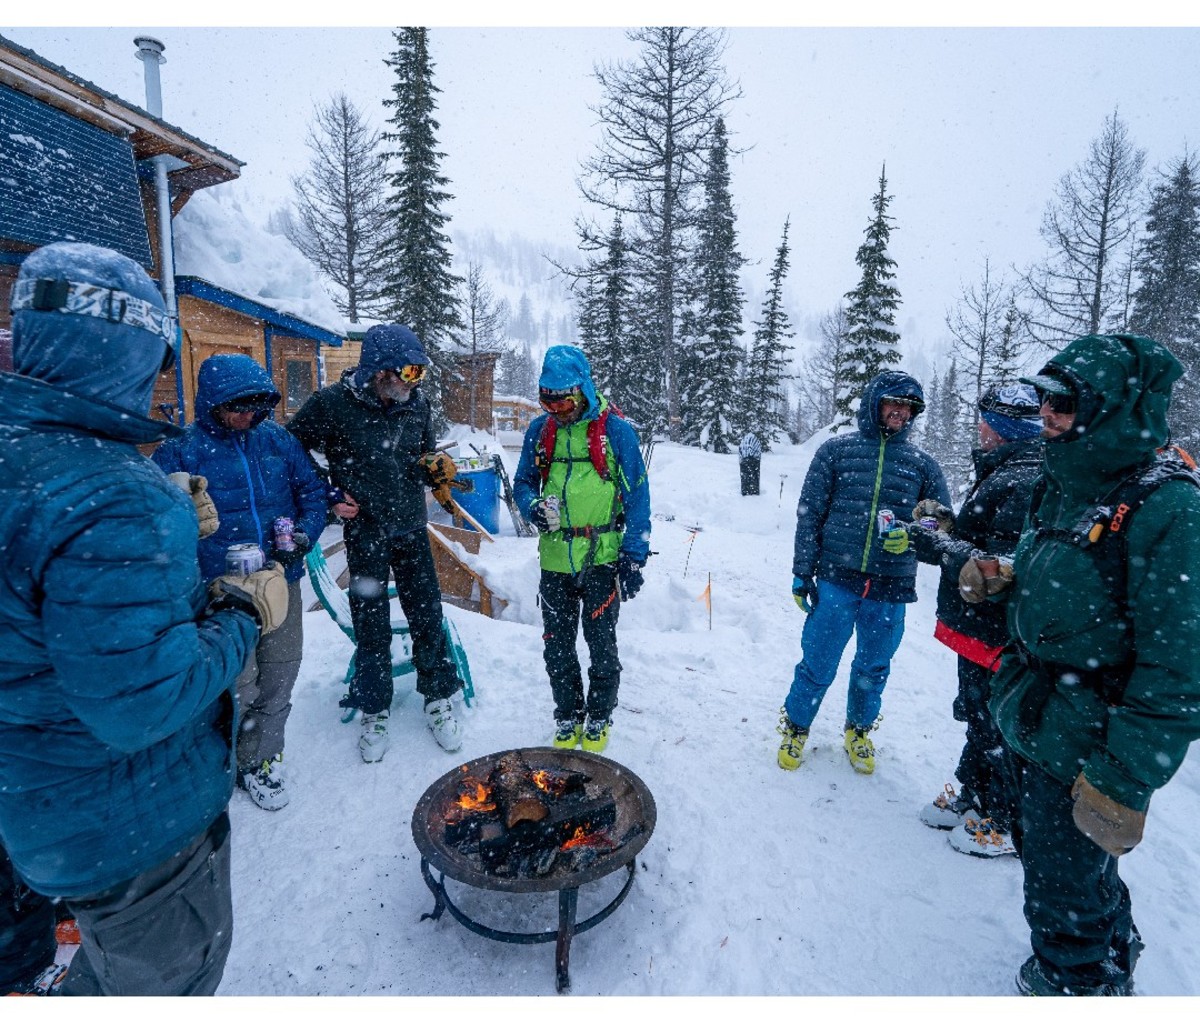 Group of skiers gather around a grill outside a lodge with beers for apres ski.